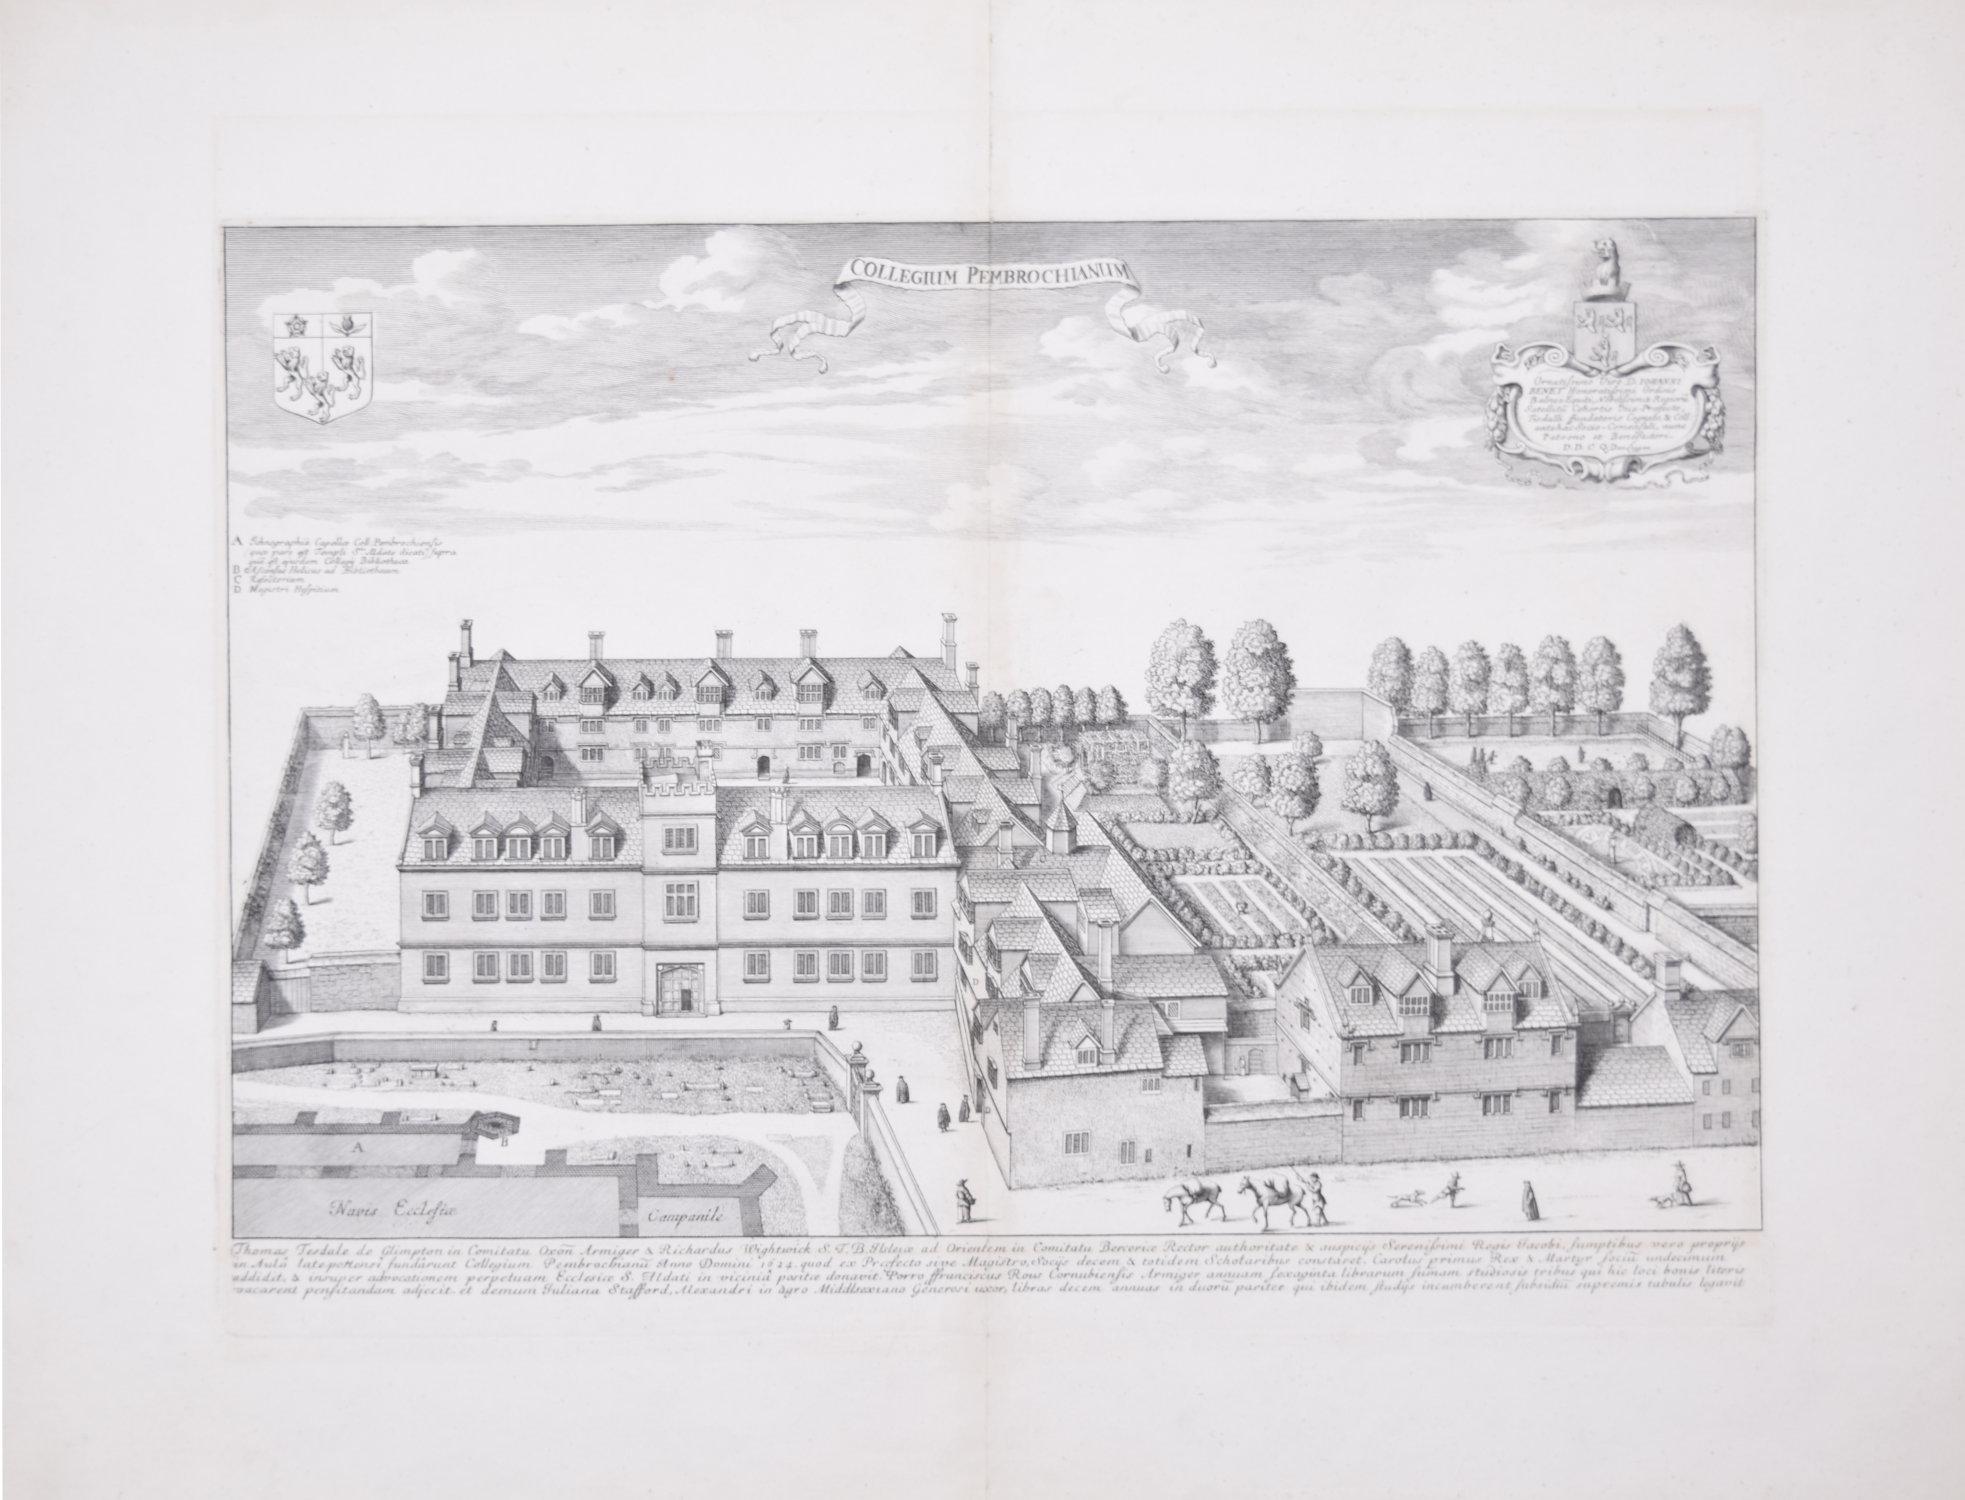 To see our other views of Oxford and Cambridge, scroll down to "More from this Seller" and below it click on "See all from this seller" - or send us a message if you cannot find the view you want.

David Loggan (1634 - 1692)
Pembroke College, Oxford